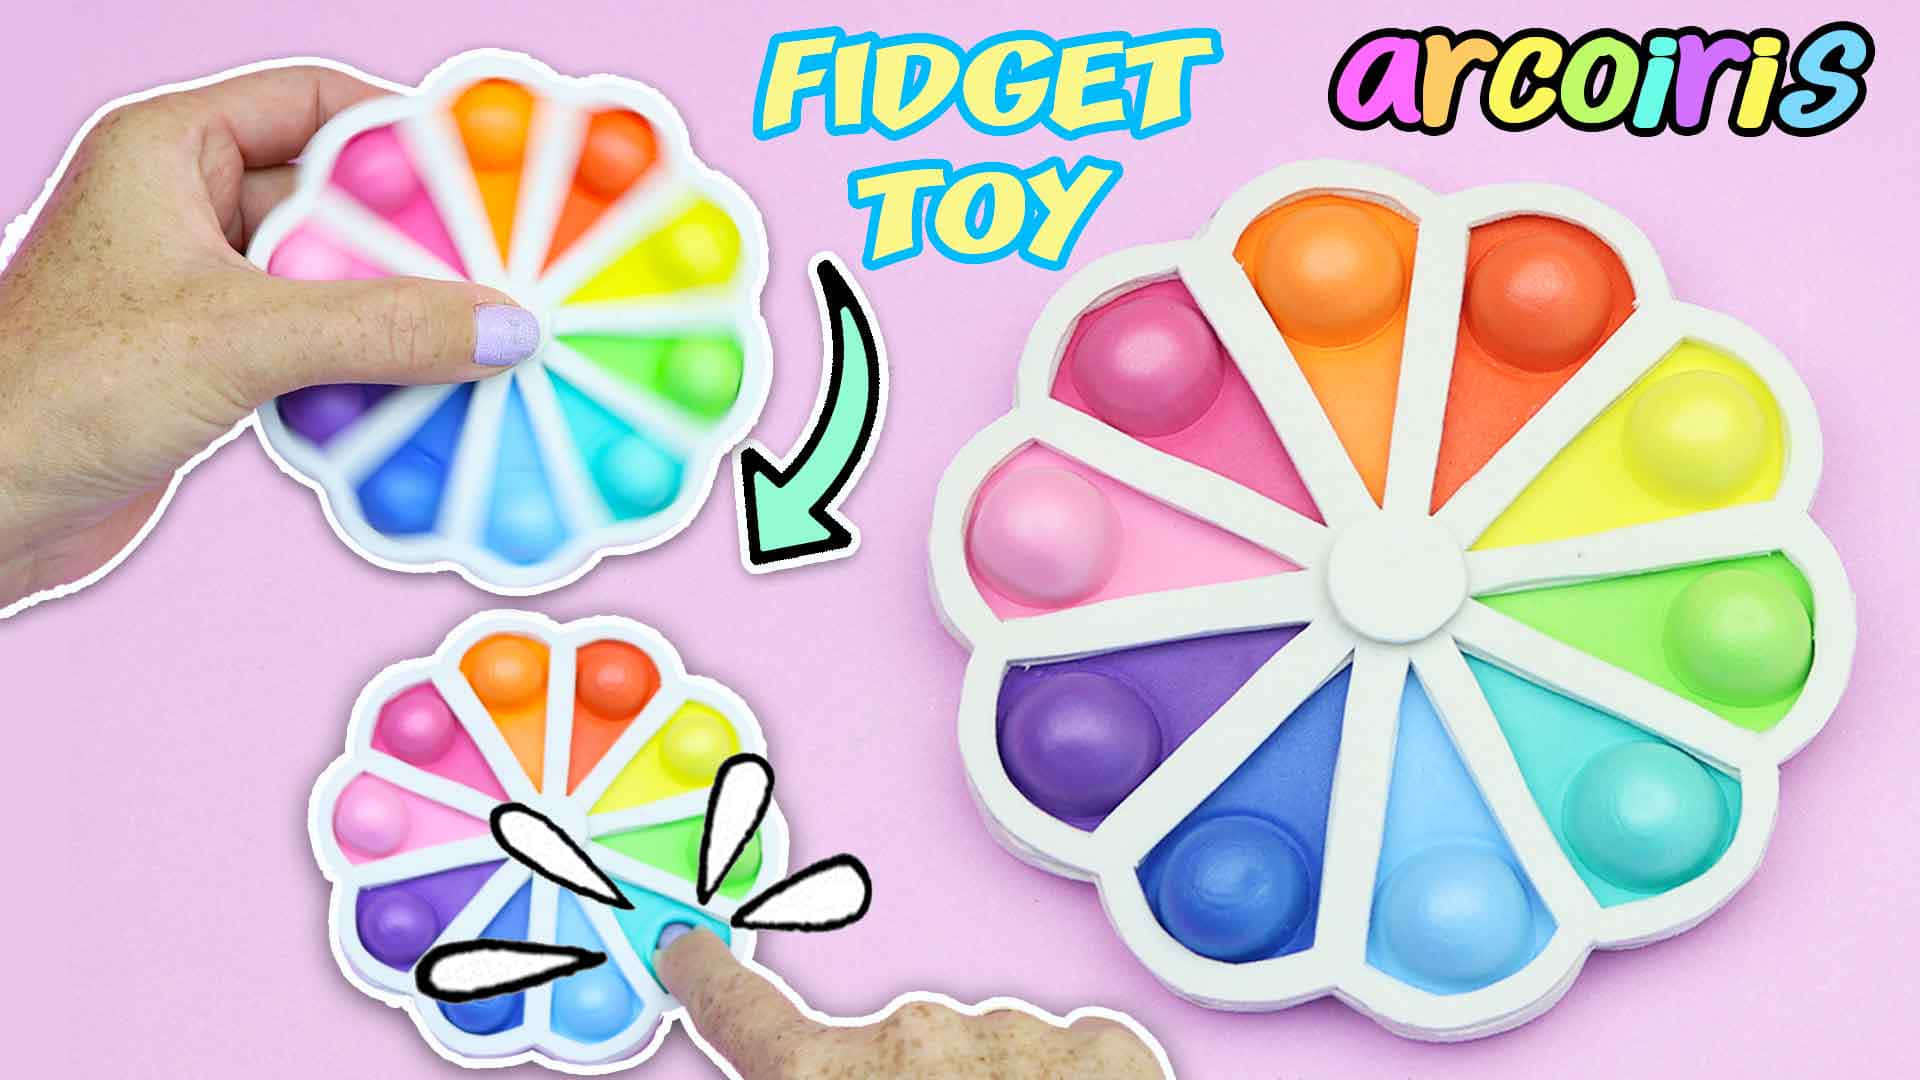 Discover the best way to stay focused: with fidget